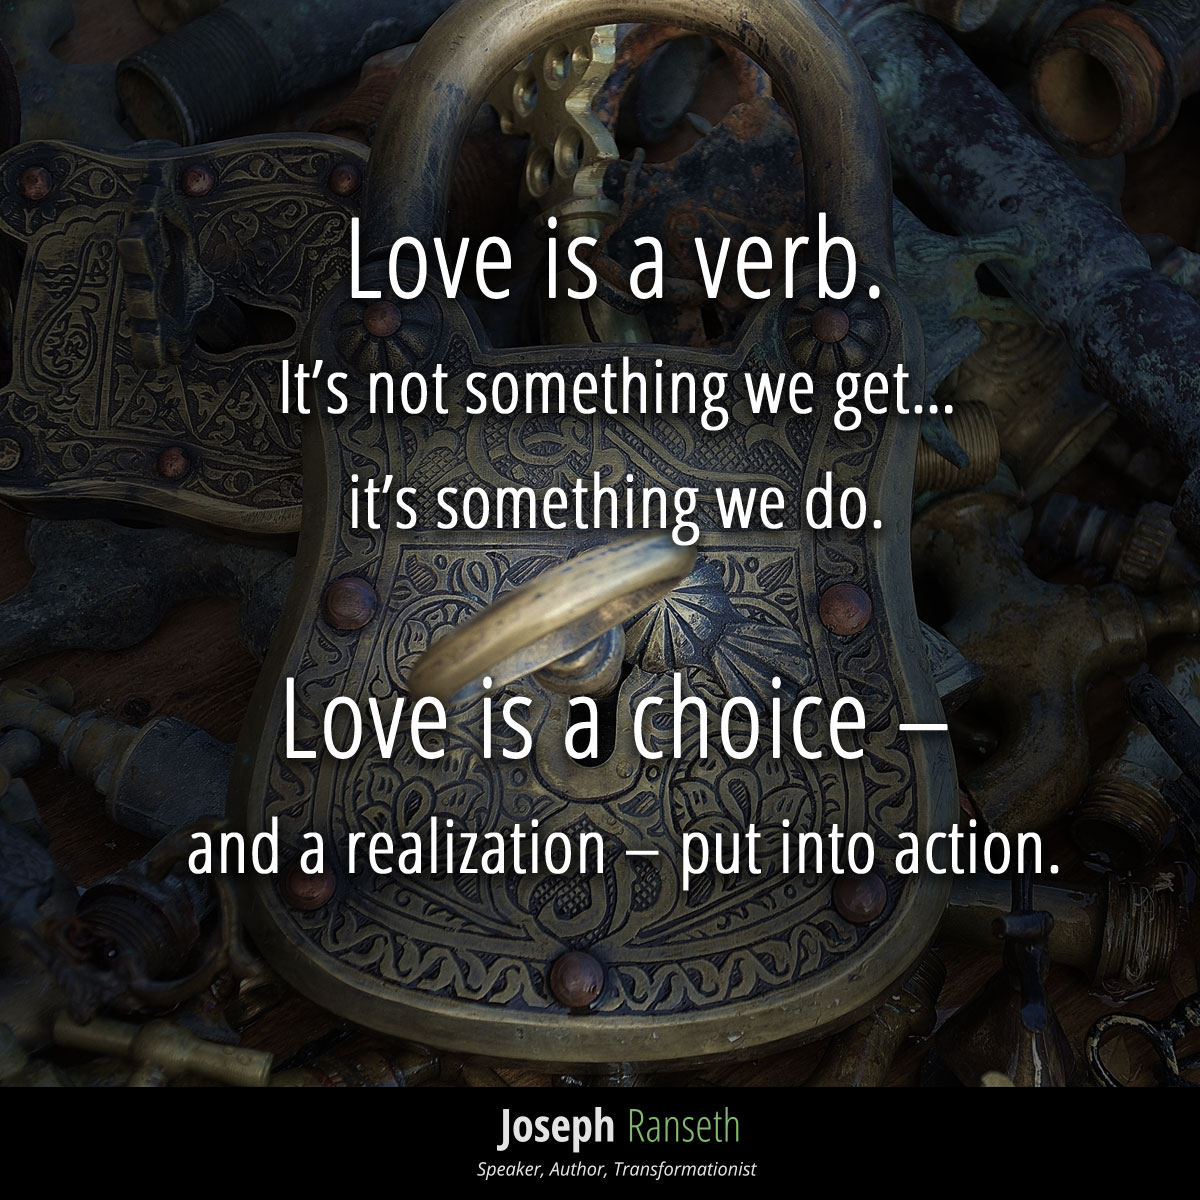  love is a verb.  It’s not something we get… it’s something we do.  
Love is a choice – and a realization – put into action.